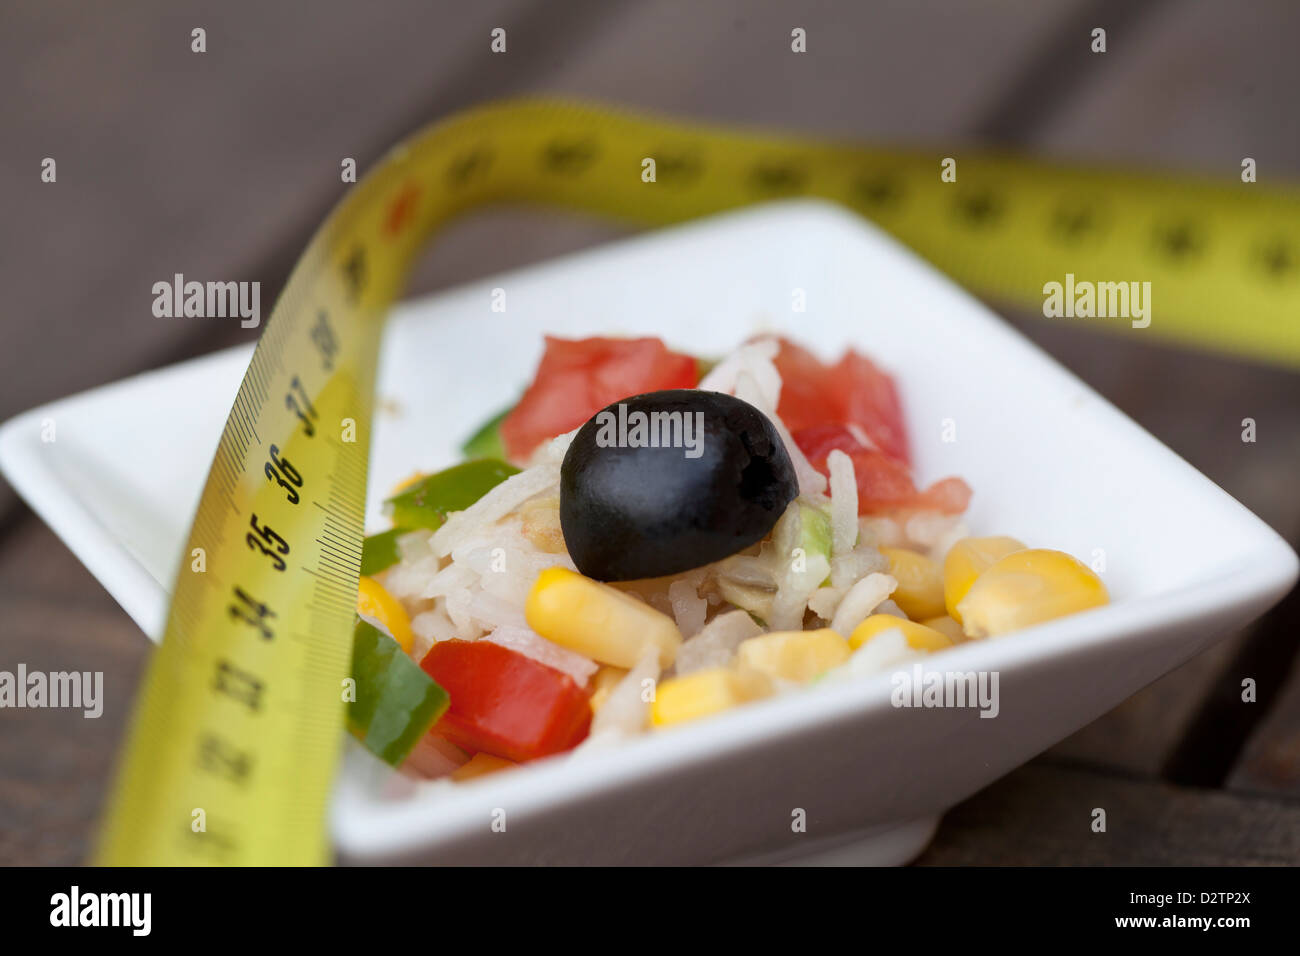 Healthy summer rice salad with tomato, onions, corn, peppers, black olives and avocado good for your diet. Stock Photo